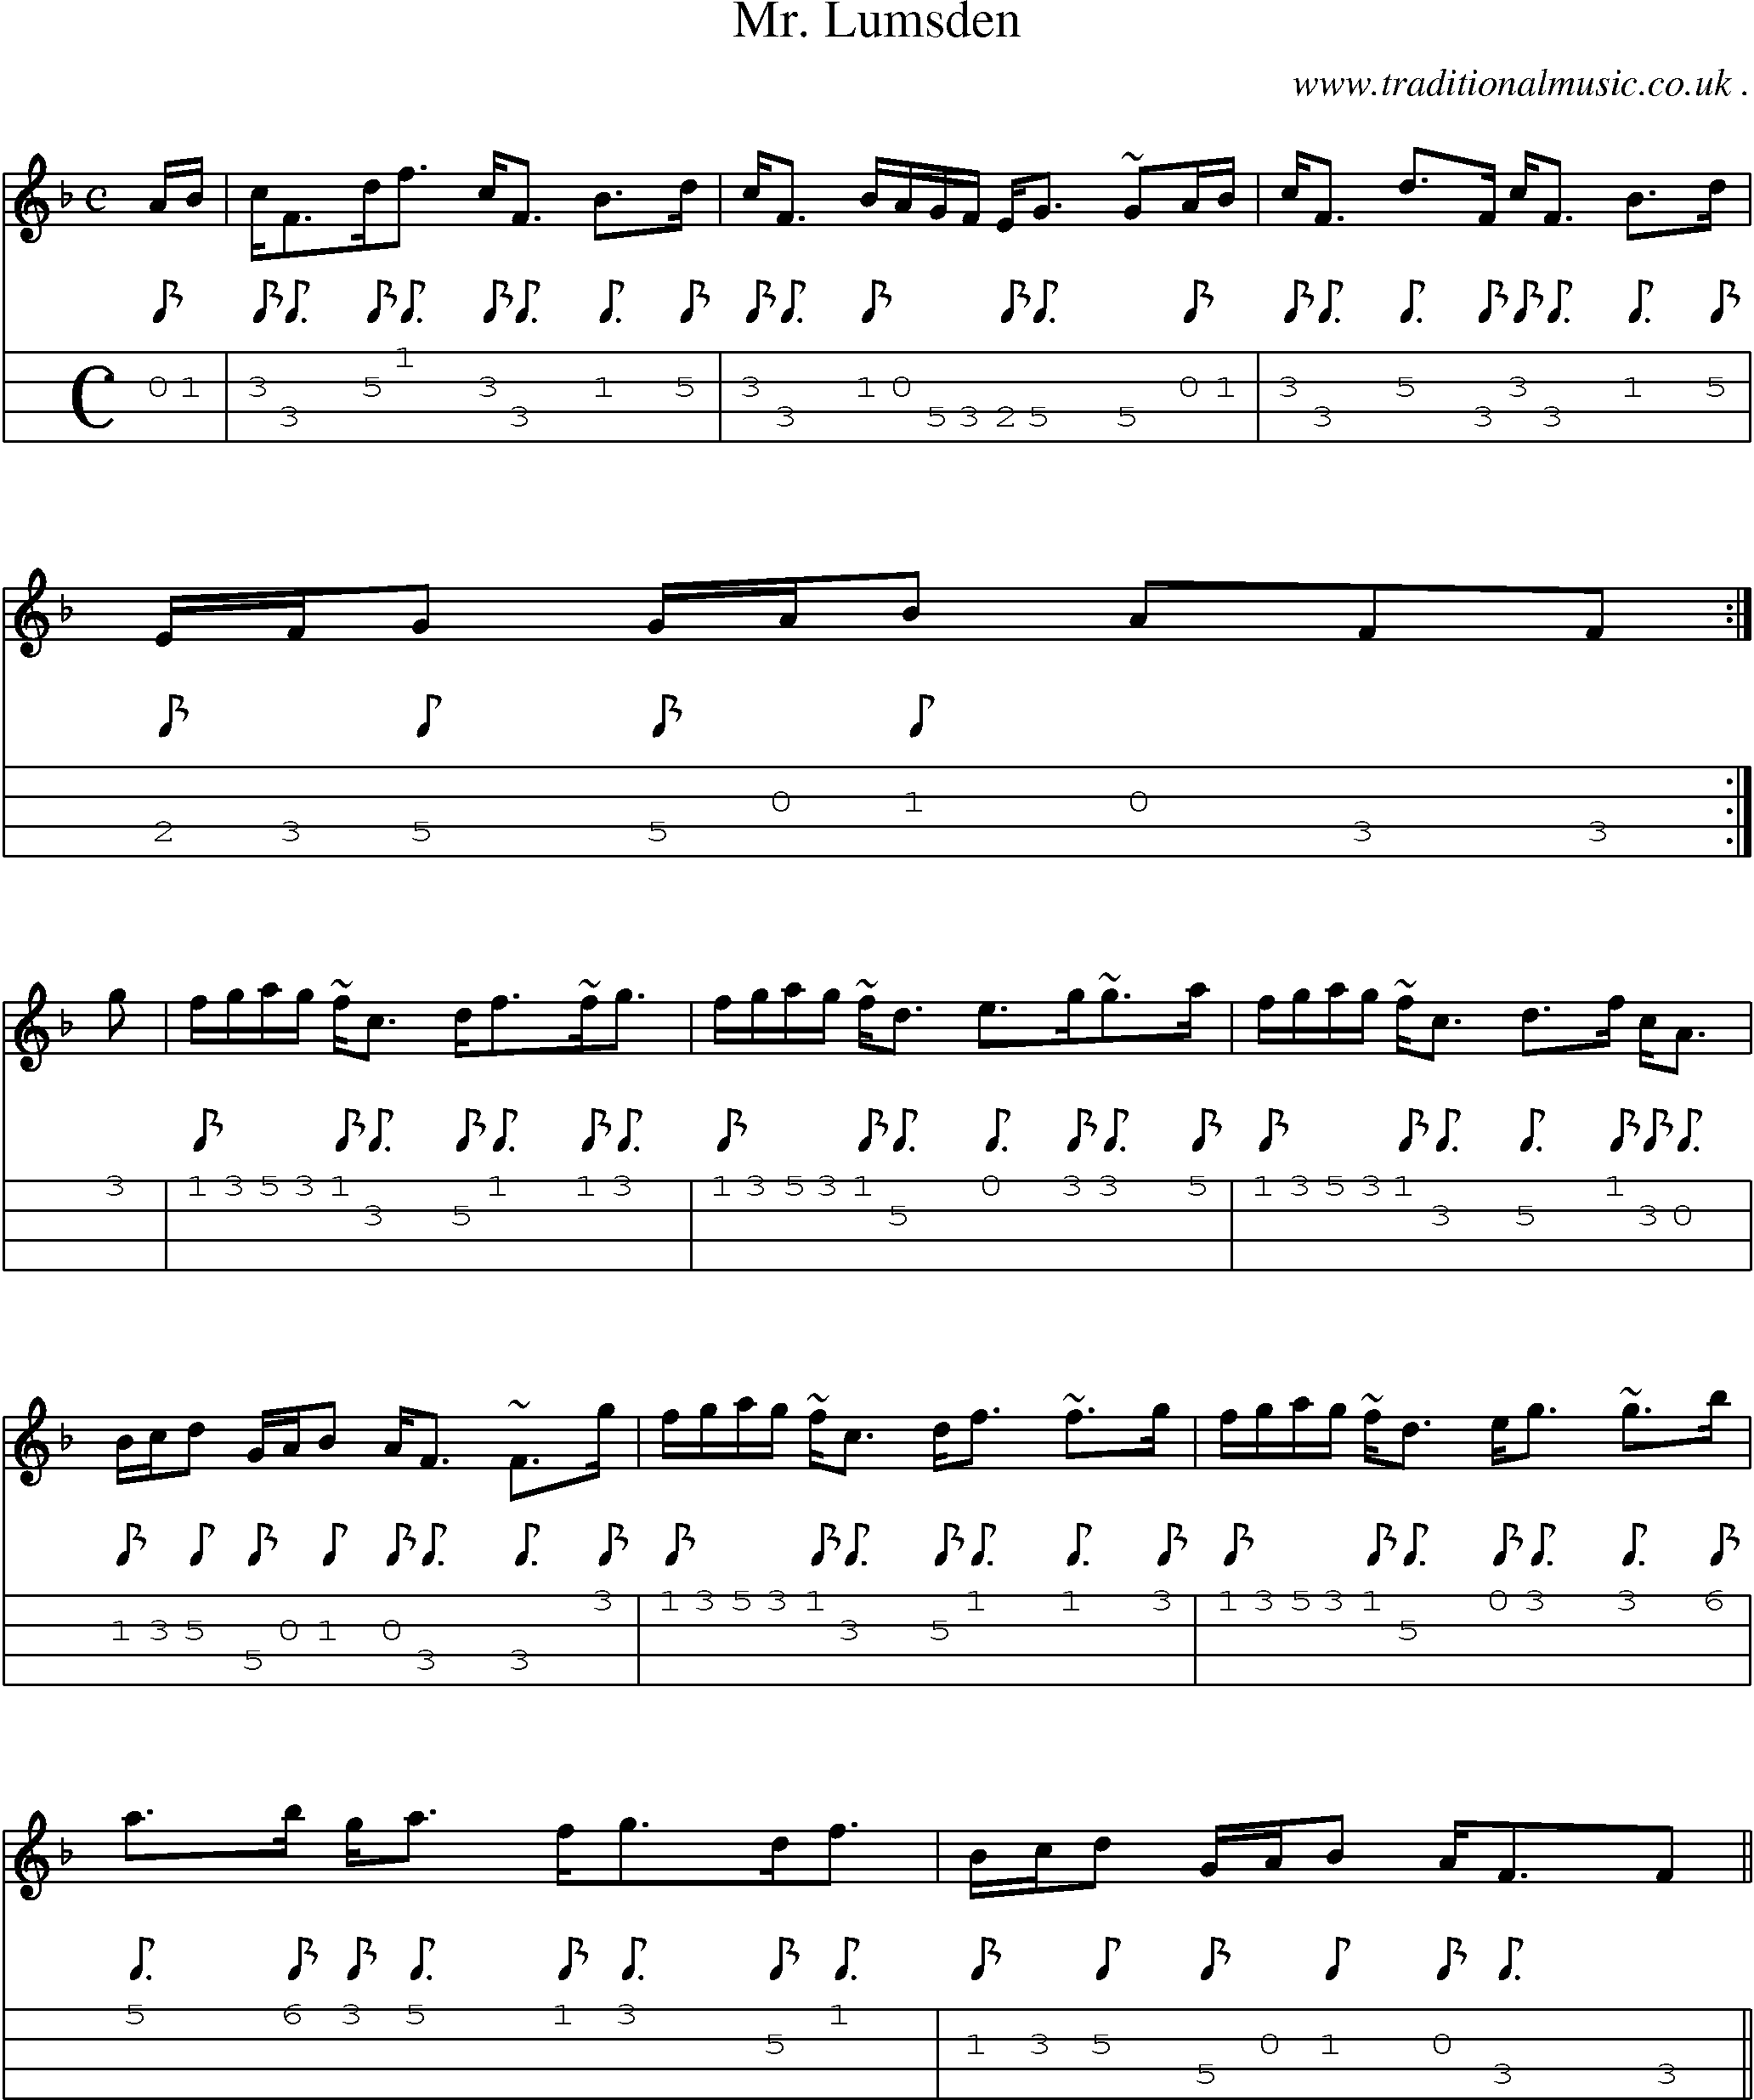 Sheet-music  score, Chords and Mandolin Tabs for Mr Lumsden